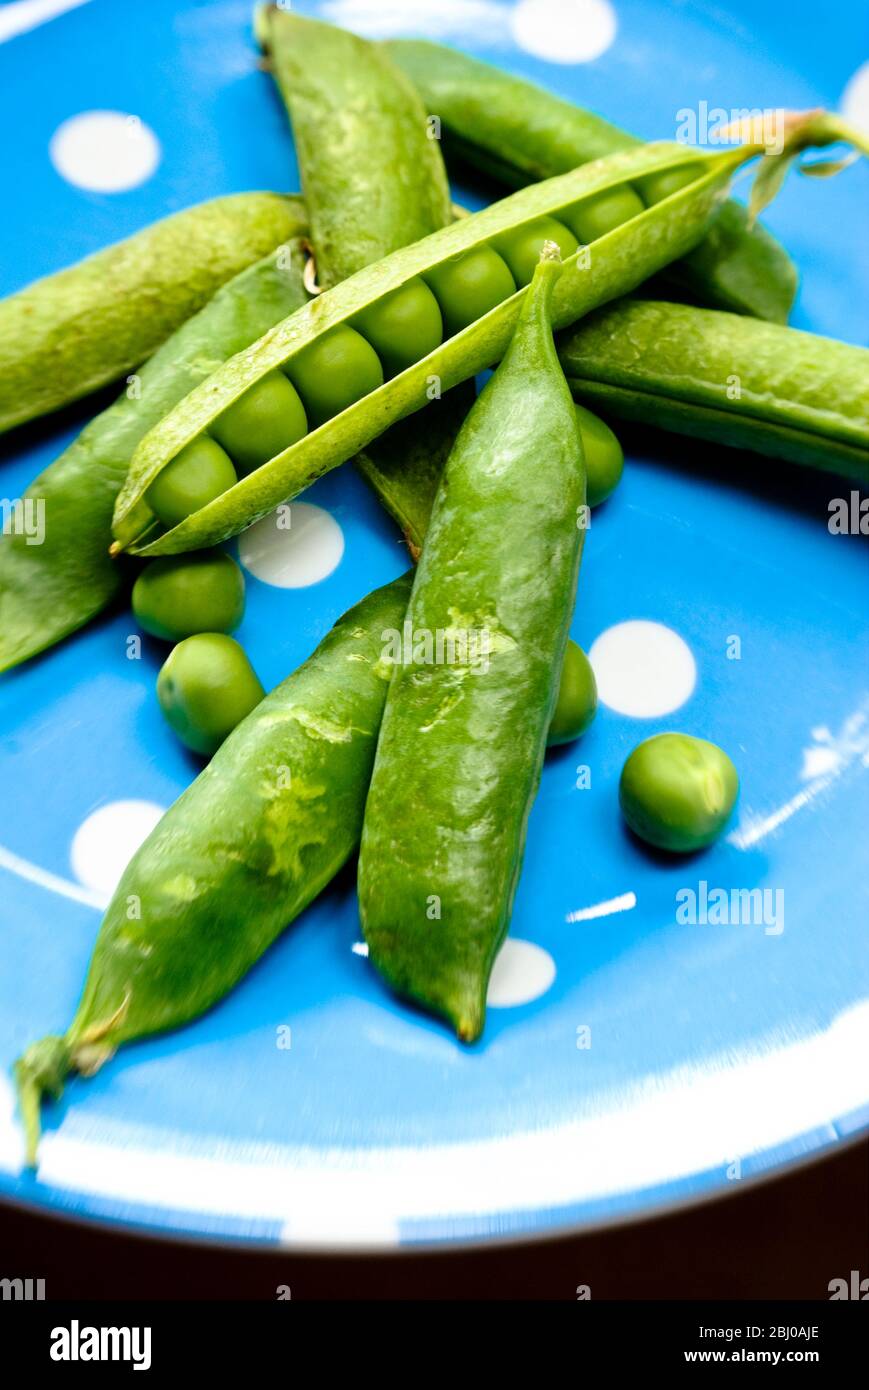 Fresh garden peas in their pods on blue spotted plate - Stock Photo